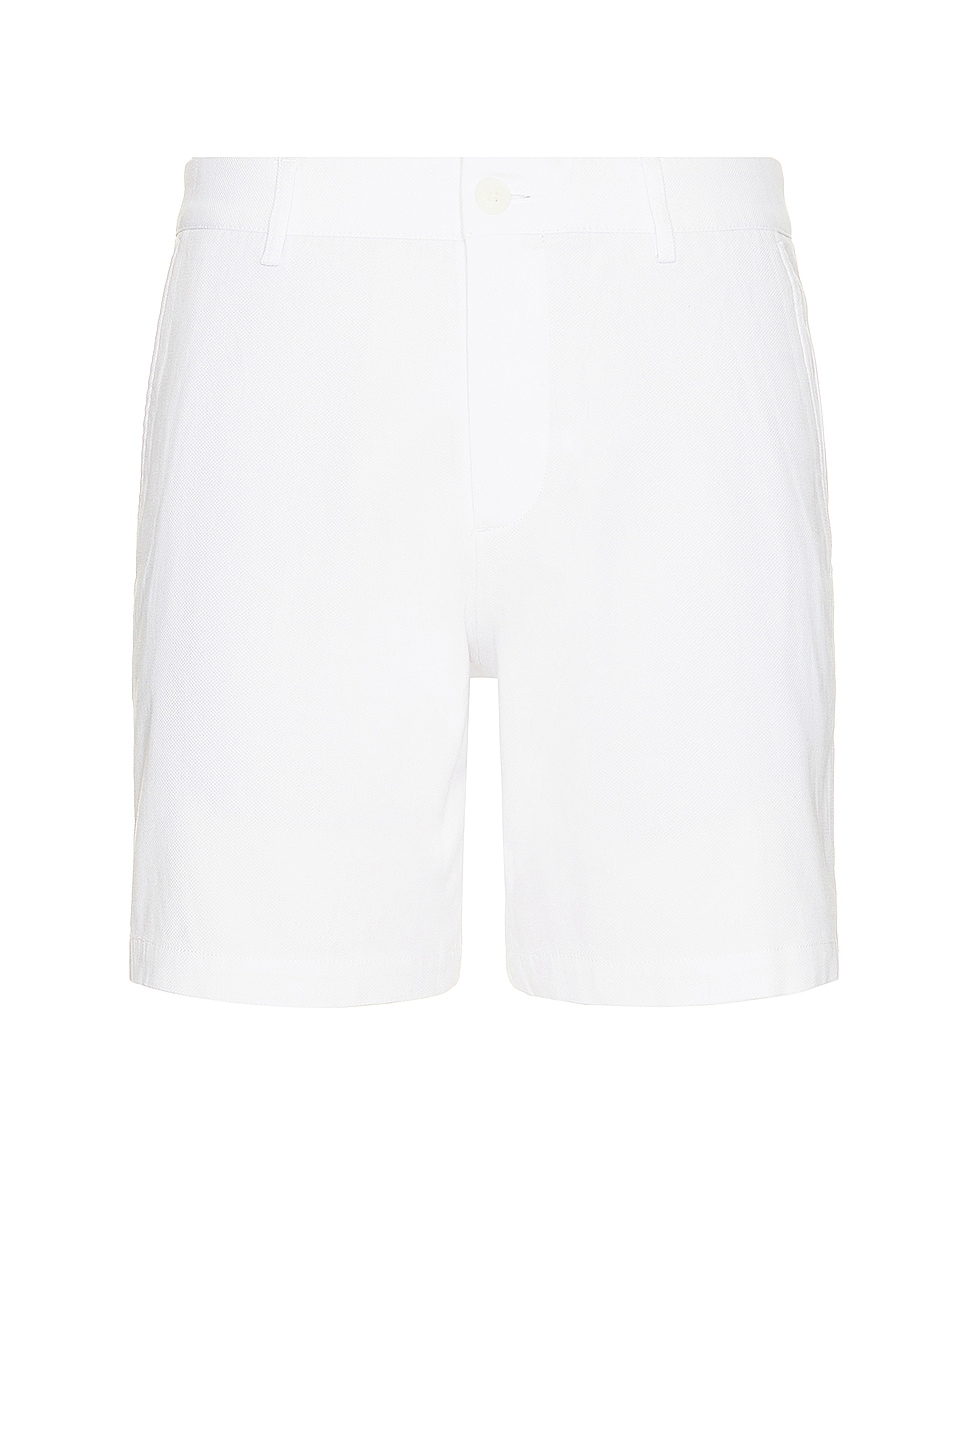 Image 1 of Club Monaco Baxter Texture Short in White